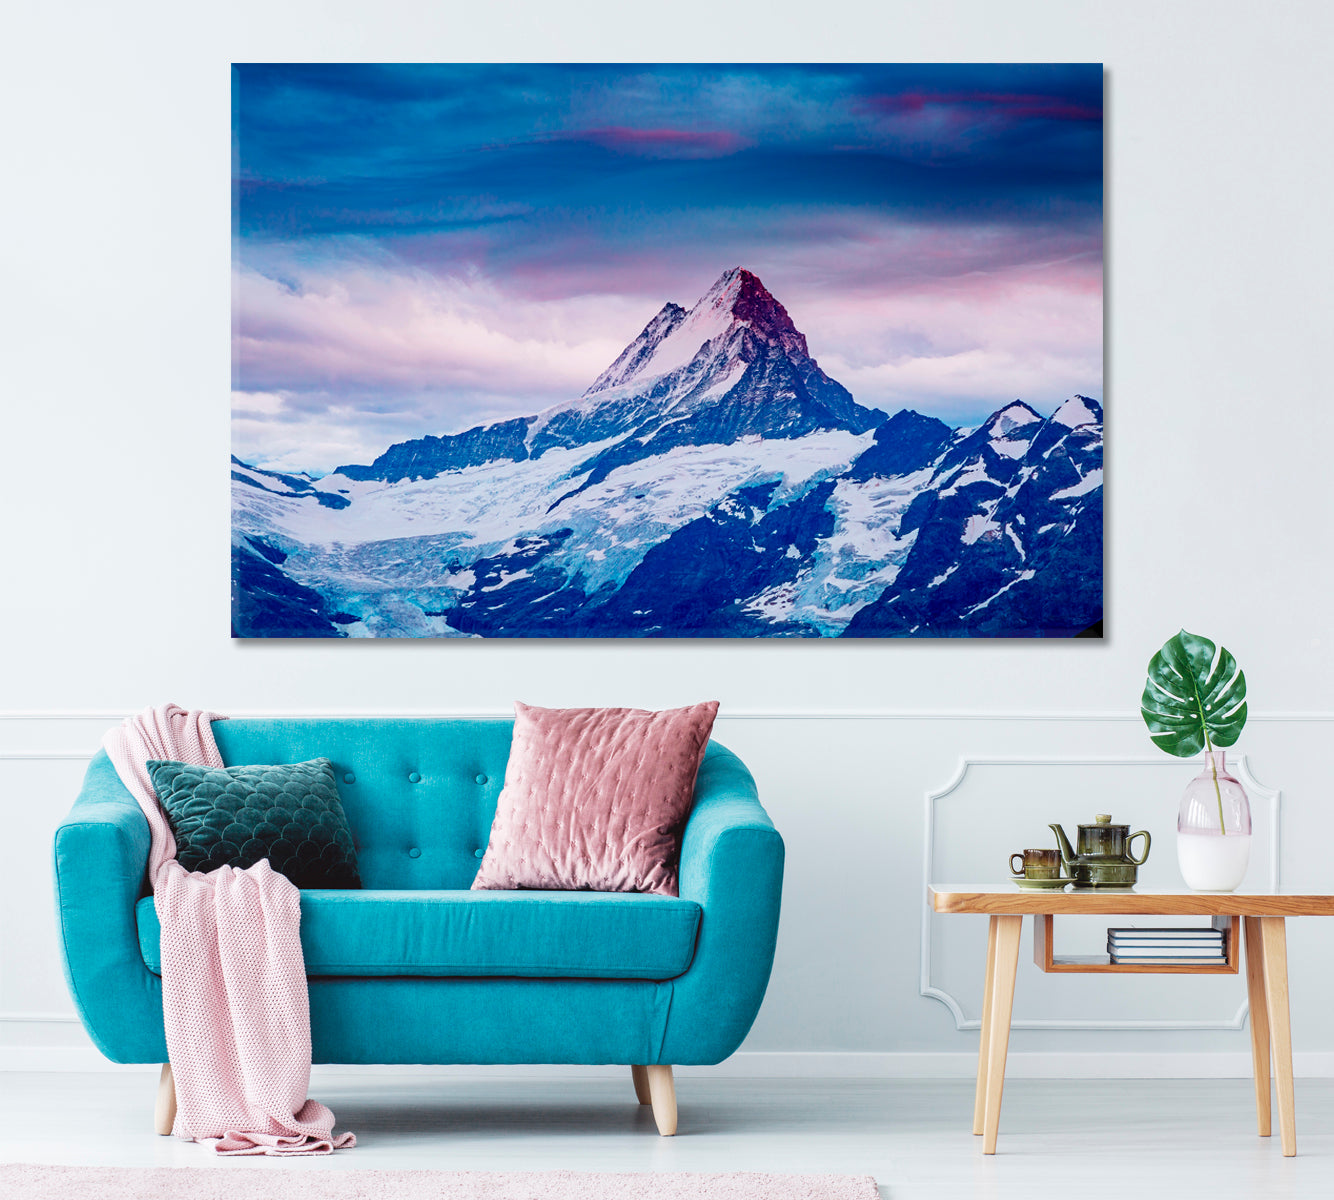 Snowy Mountains in Swiss Alps Canvas Print ArtLexy 1 Panel 24"x16" inches 